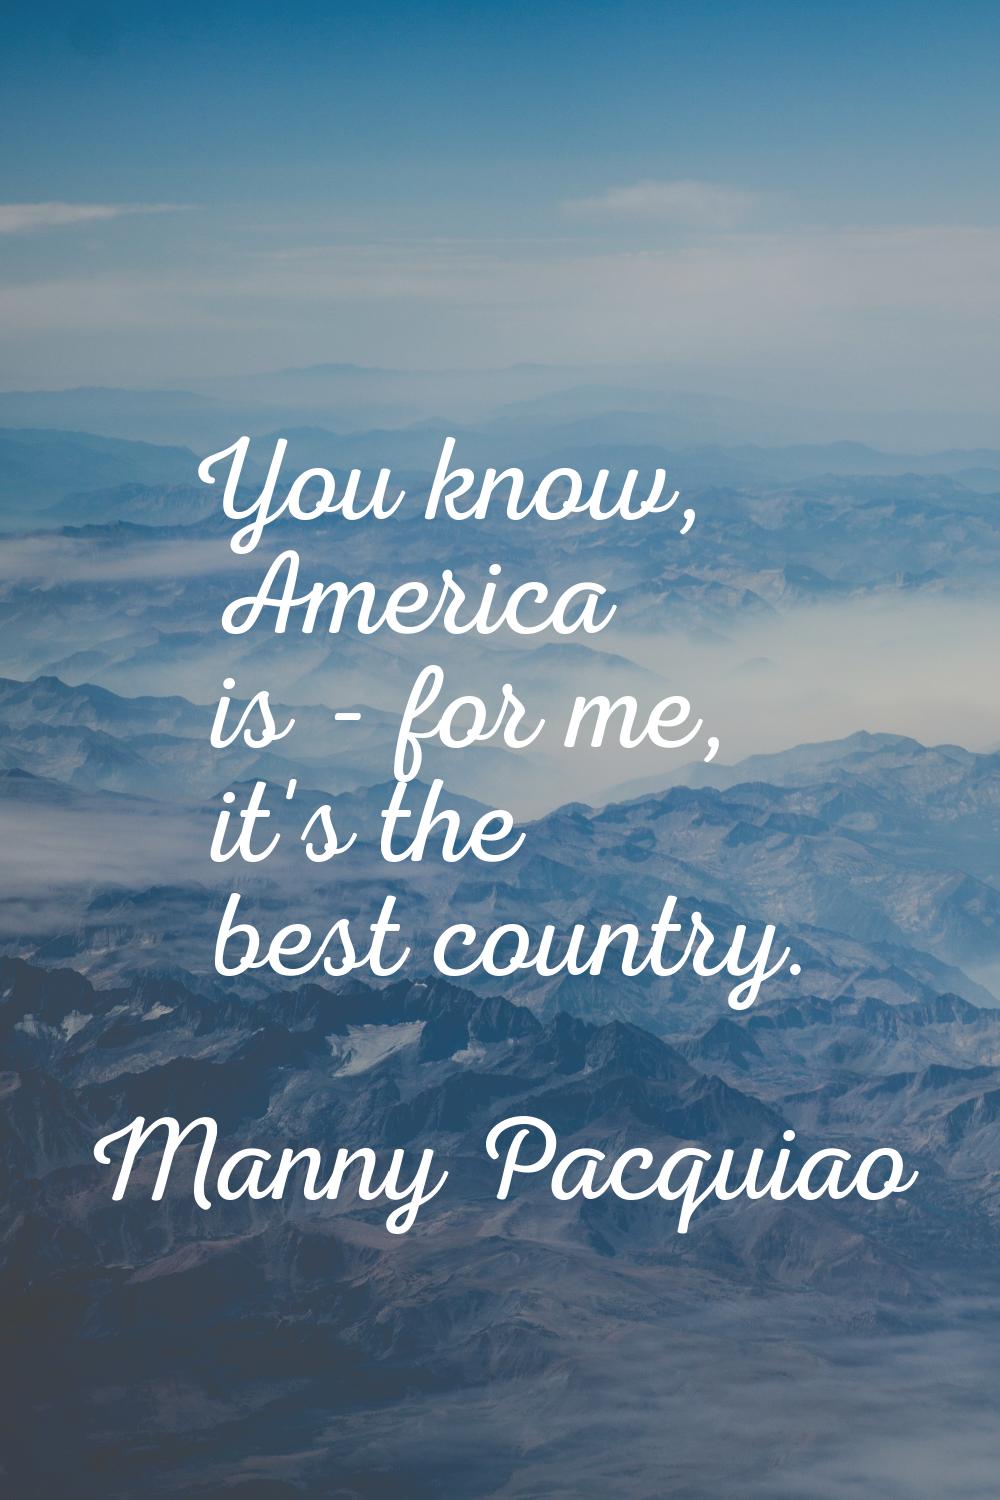 You know, America is - for me, it's the best country.